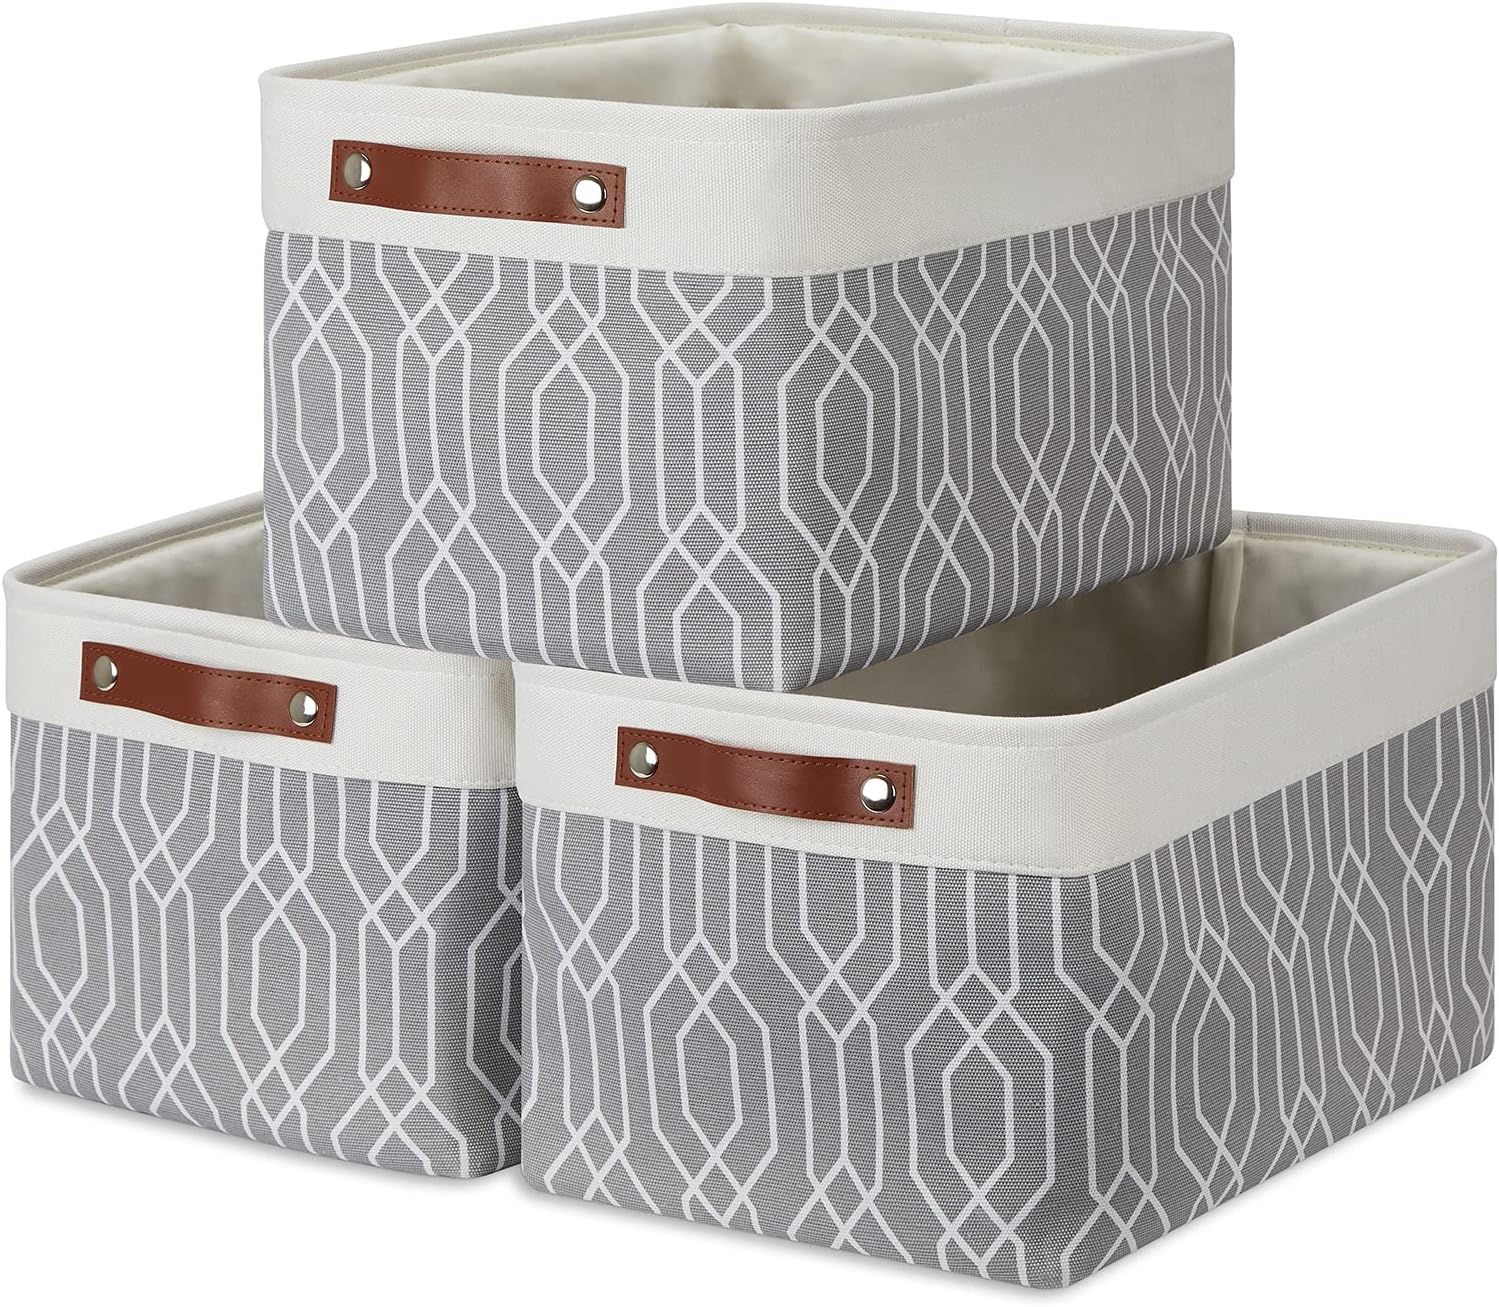 Temary Large Storage Baskets 3 Piece Fabric Storage Bins Boxes Decorative Storage Baskets for shelves, Towels, Toys Baskets for Storage Home Closet, Office Shelf